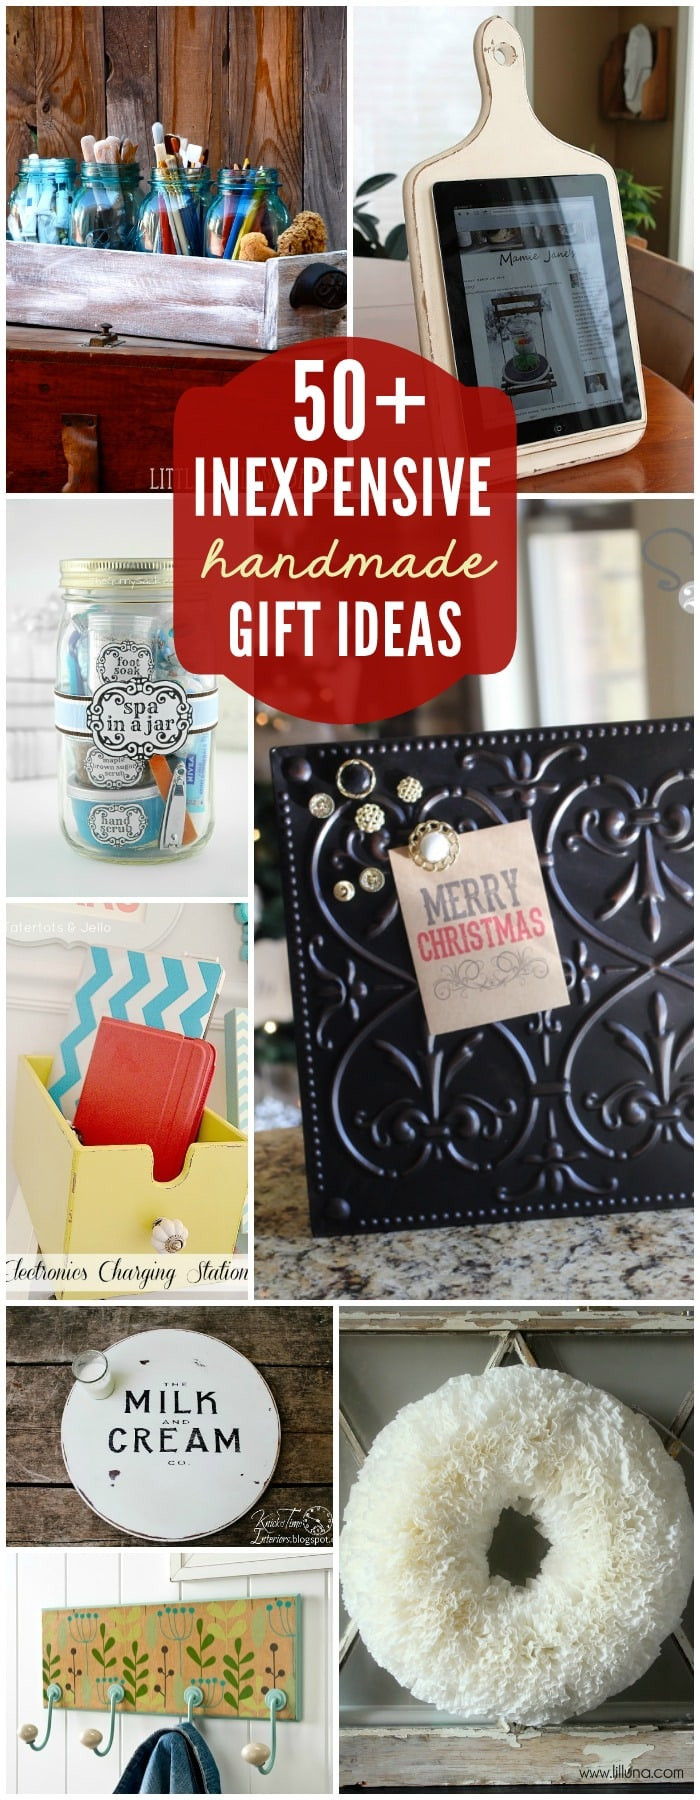 Holiday Cheap Gift Ideas
 75 Gift Ideas under $5